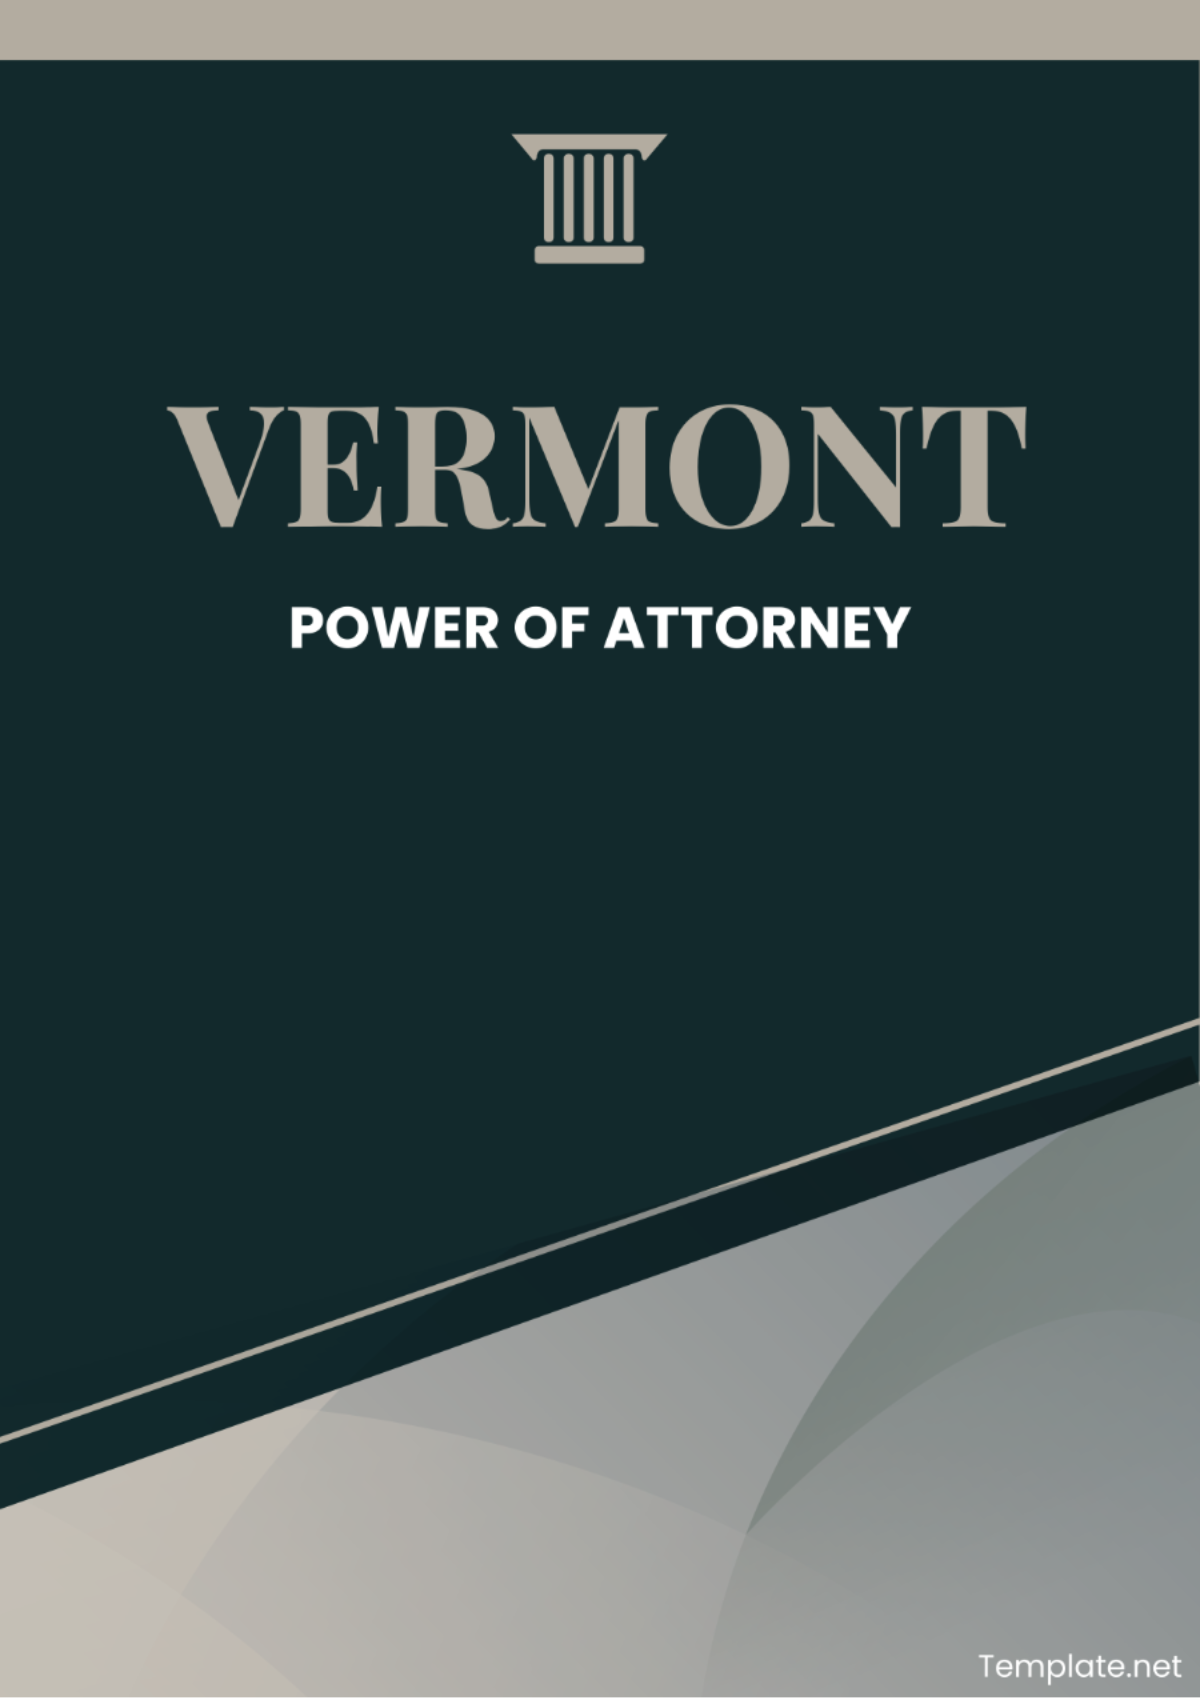 Vermont Power of Attorney Template